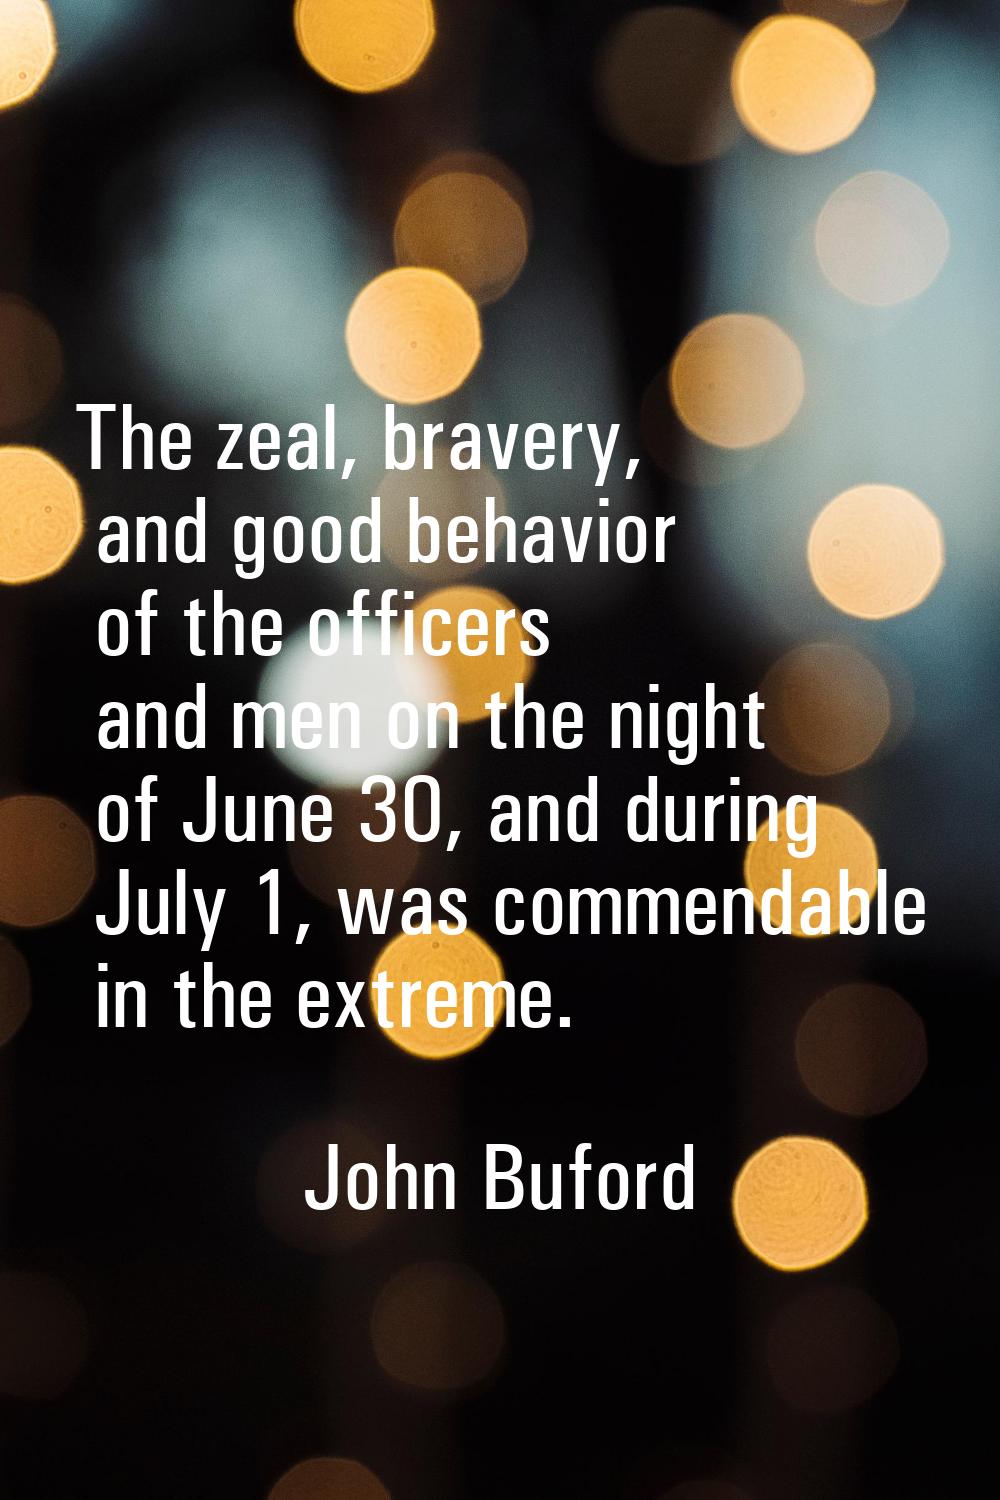 The zeal, bravery, and good behavior of the officers and men on the night of June 30, and during Ju